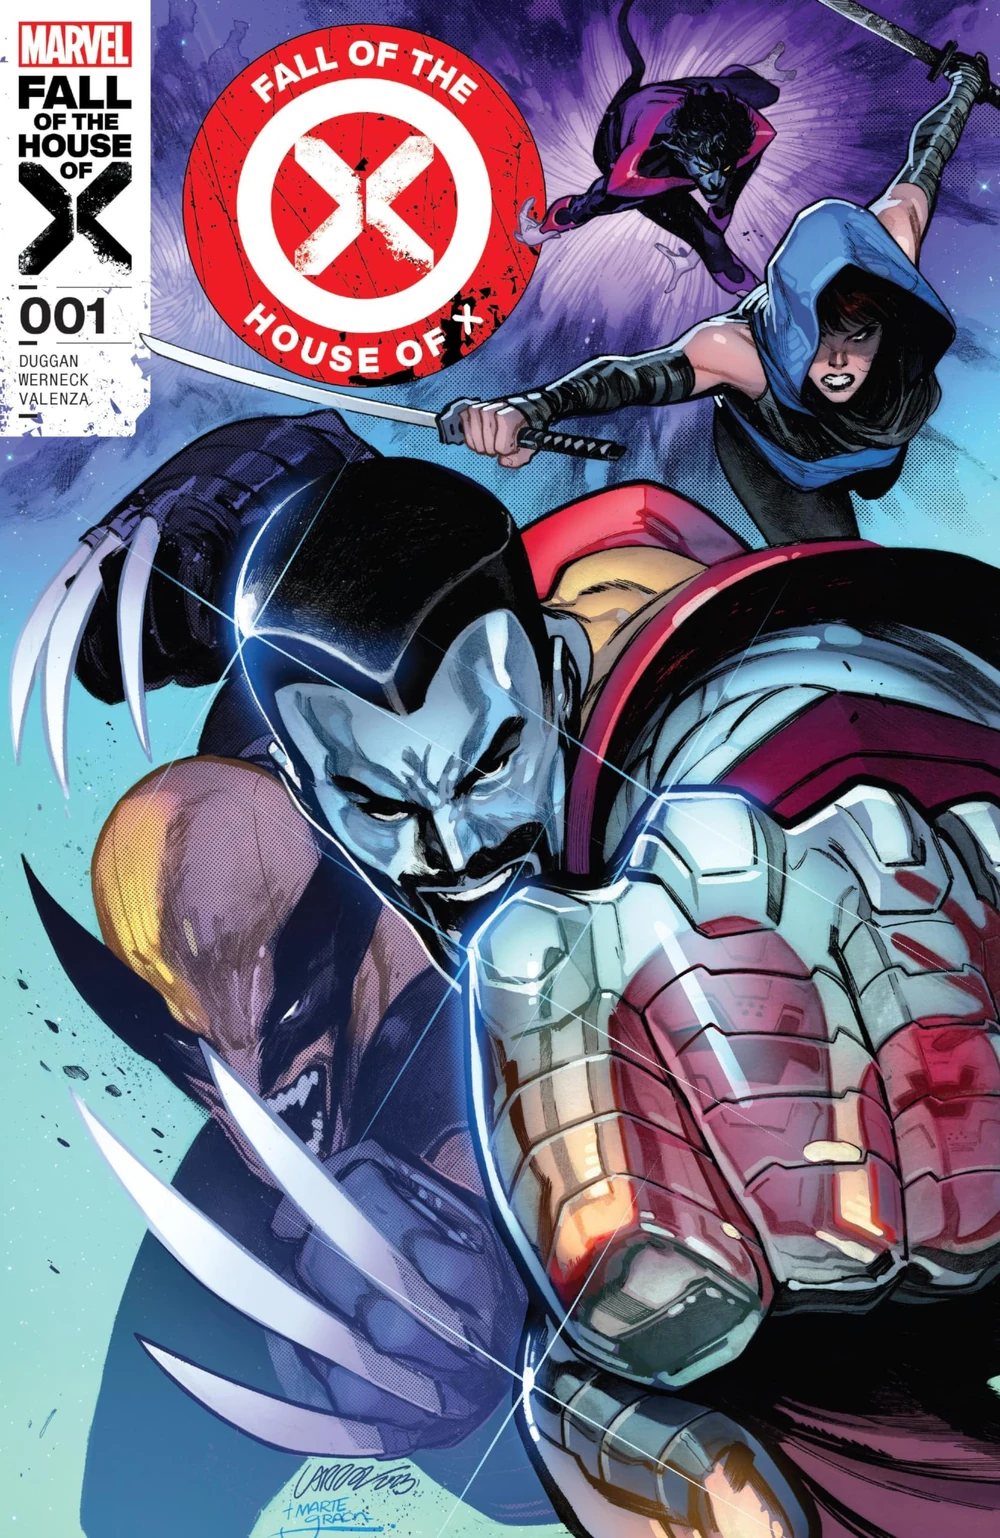 Fall of the House of X #1: Cyclops' Crucial Trial